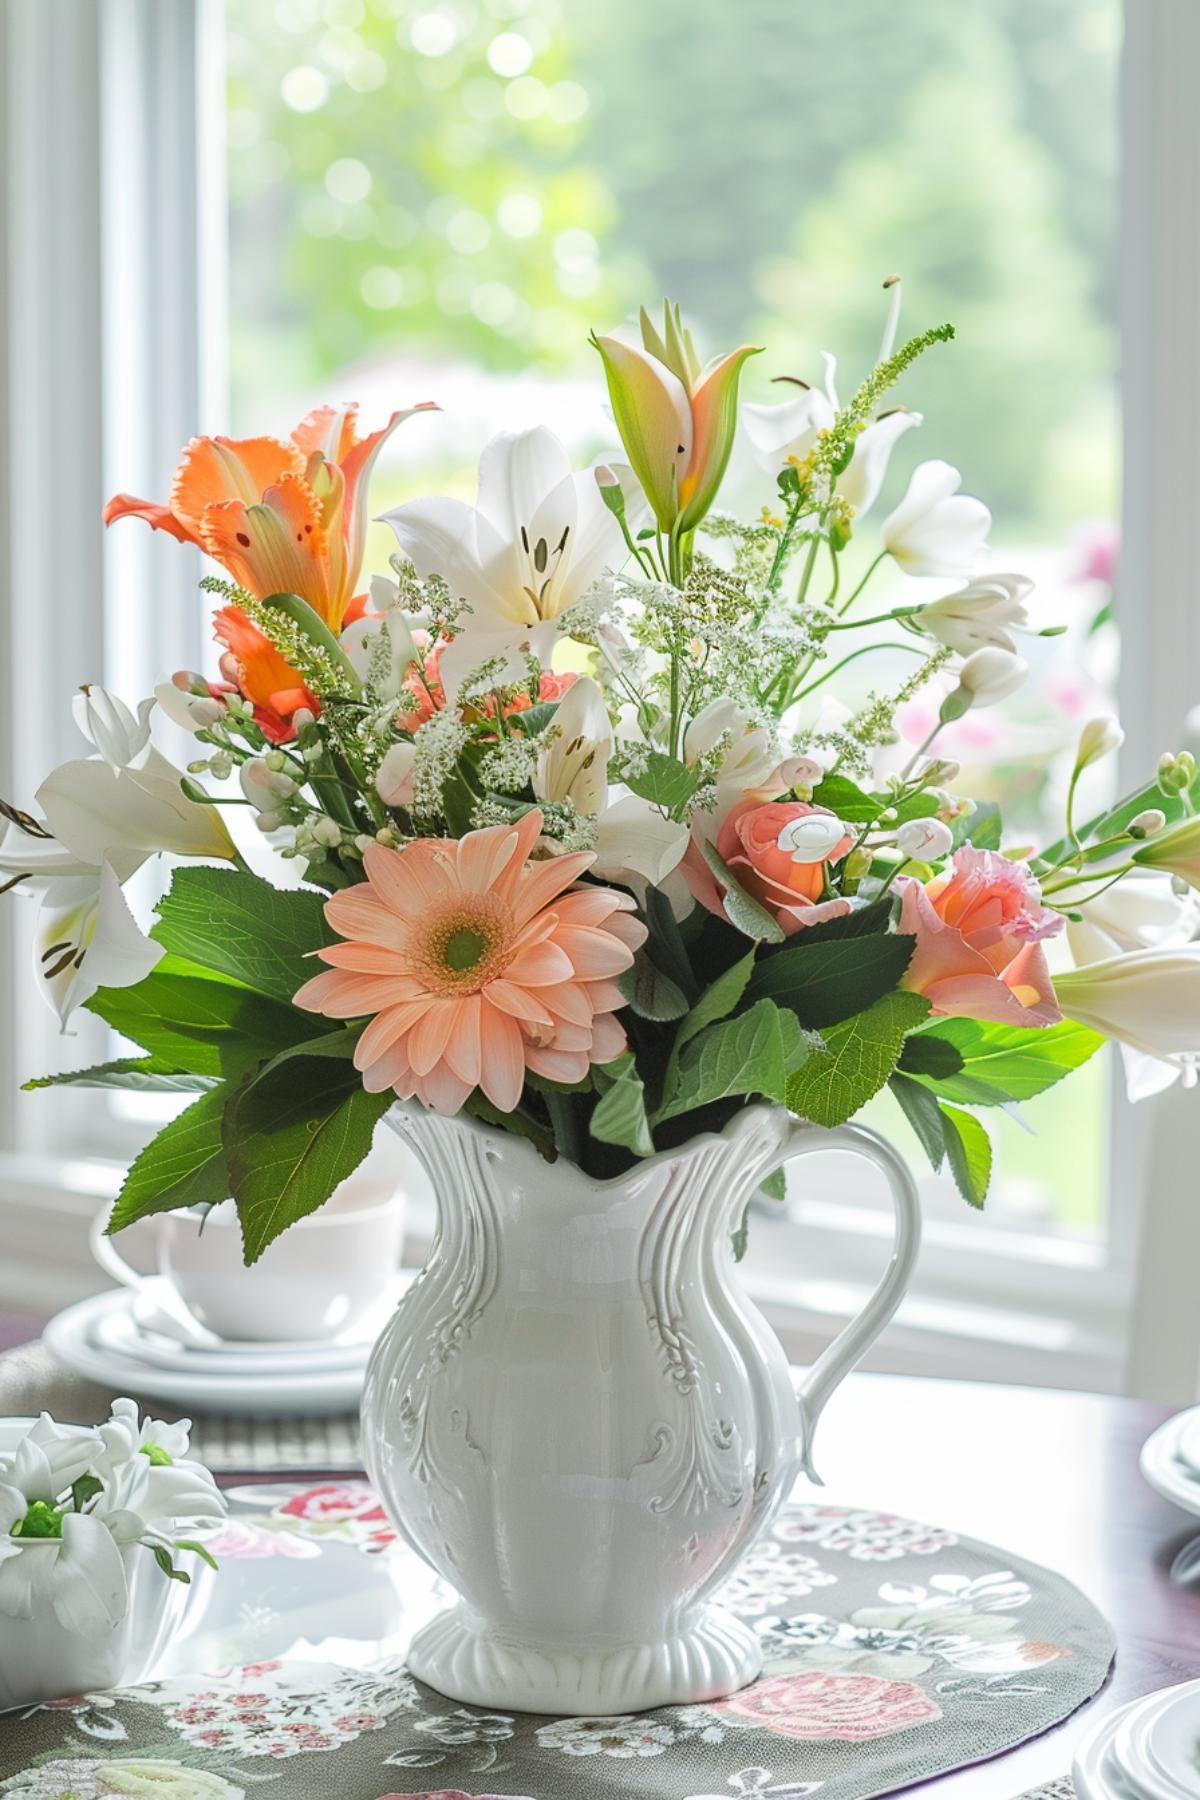 Vintage Pitcher and Pastel Blooms